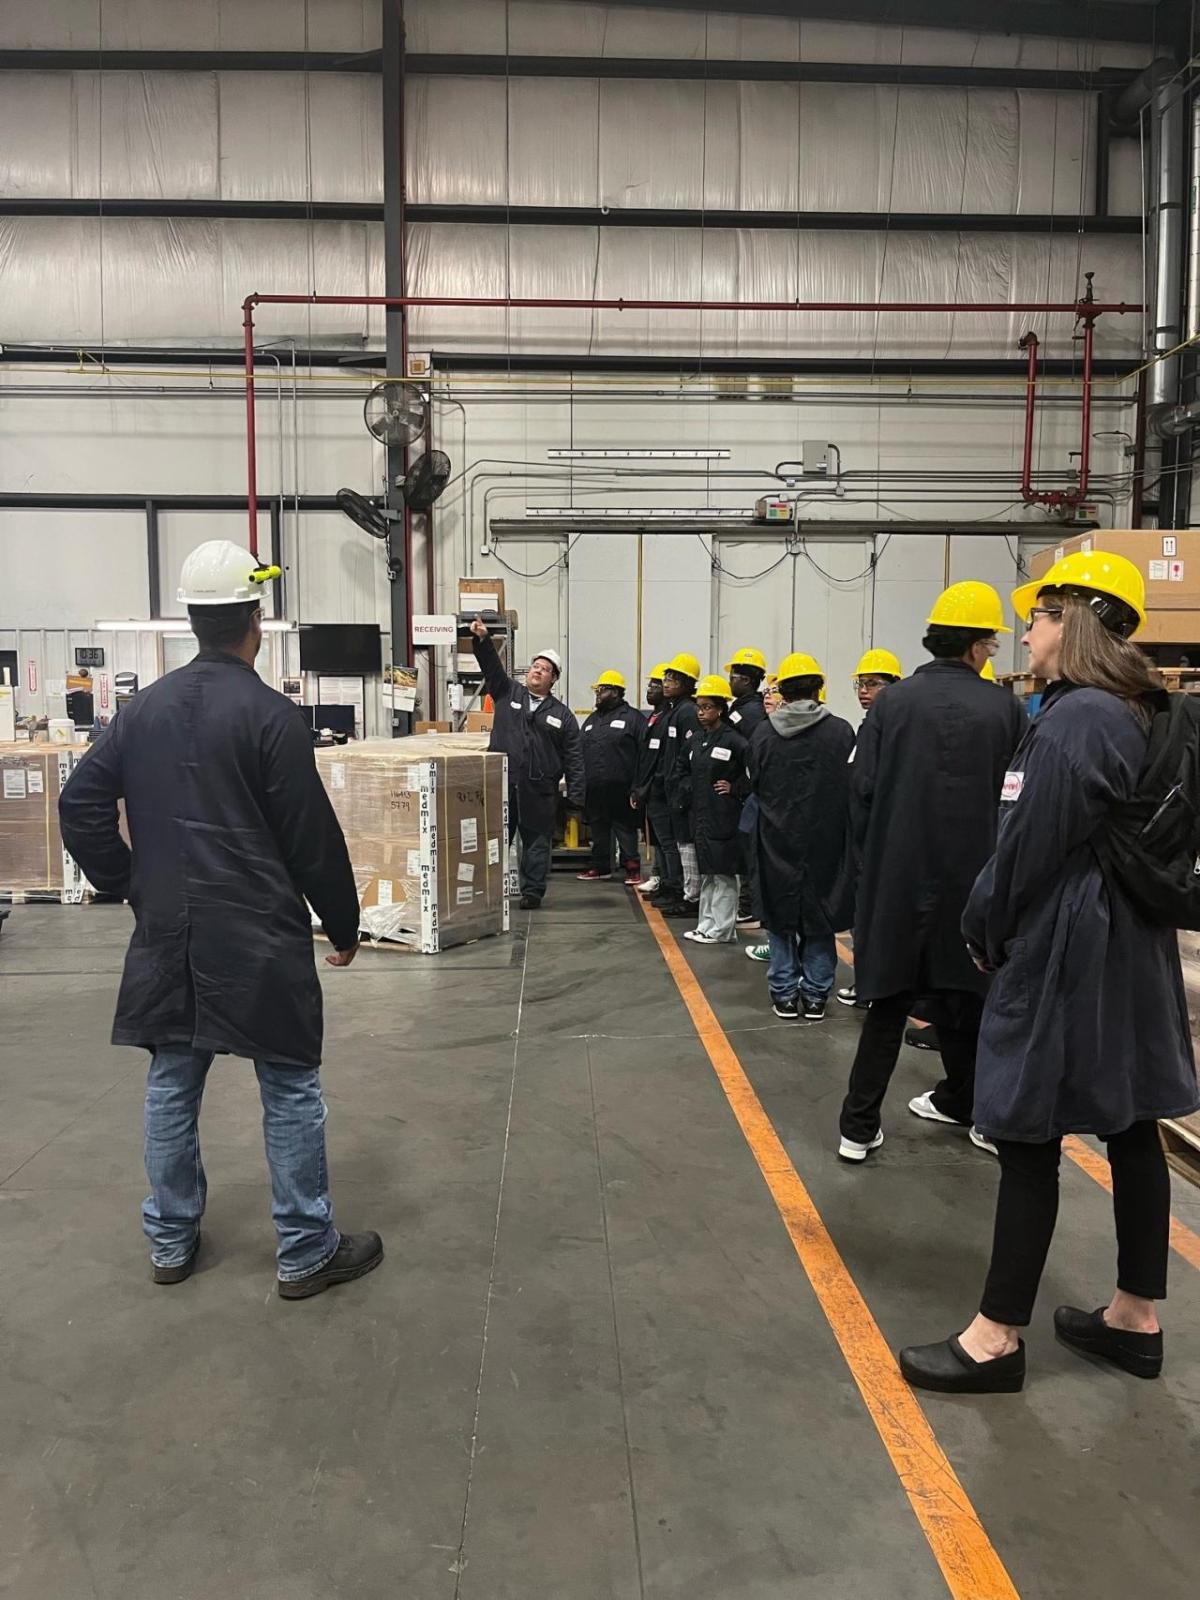 A group of staff and children on a tour of a warehouse.